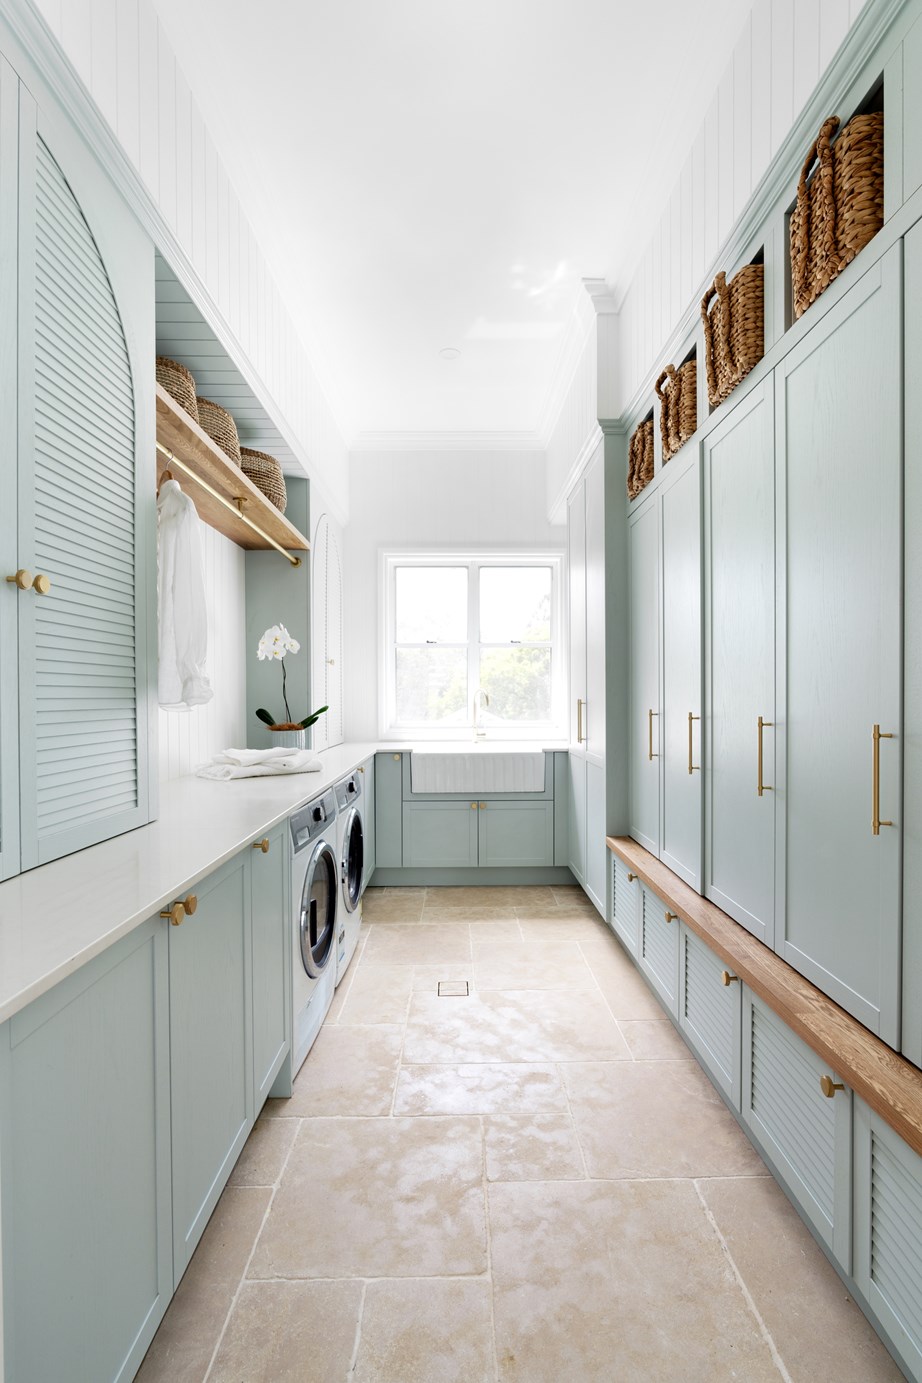 The laundry in this [modern farmhouse](https://www.homestolove.com.au/modern-country-farmhouse-brisbane-23394|target="_blank") features open shelves that provide space for pull-out baskets, and a brass hanging rail, from Passio Interiors, that comes in handy for hanging clothes.